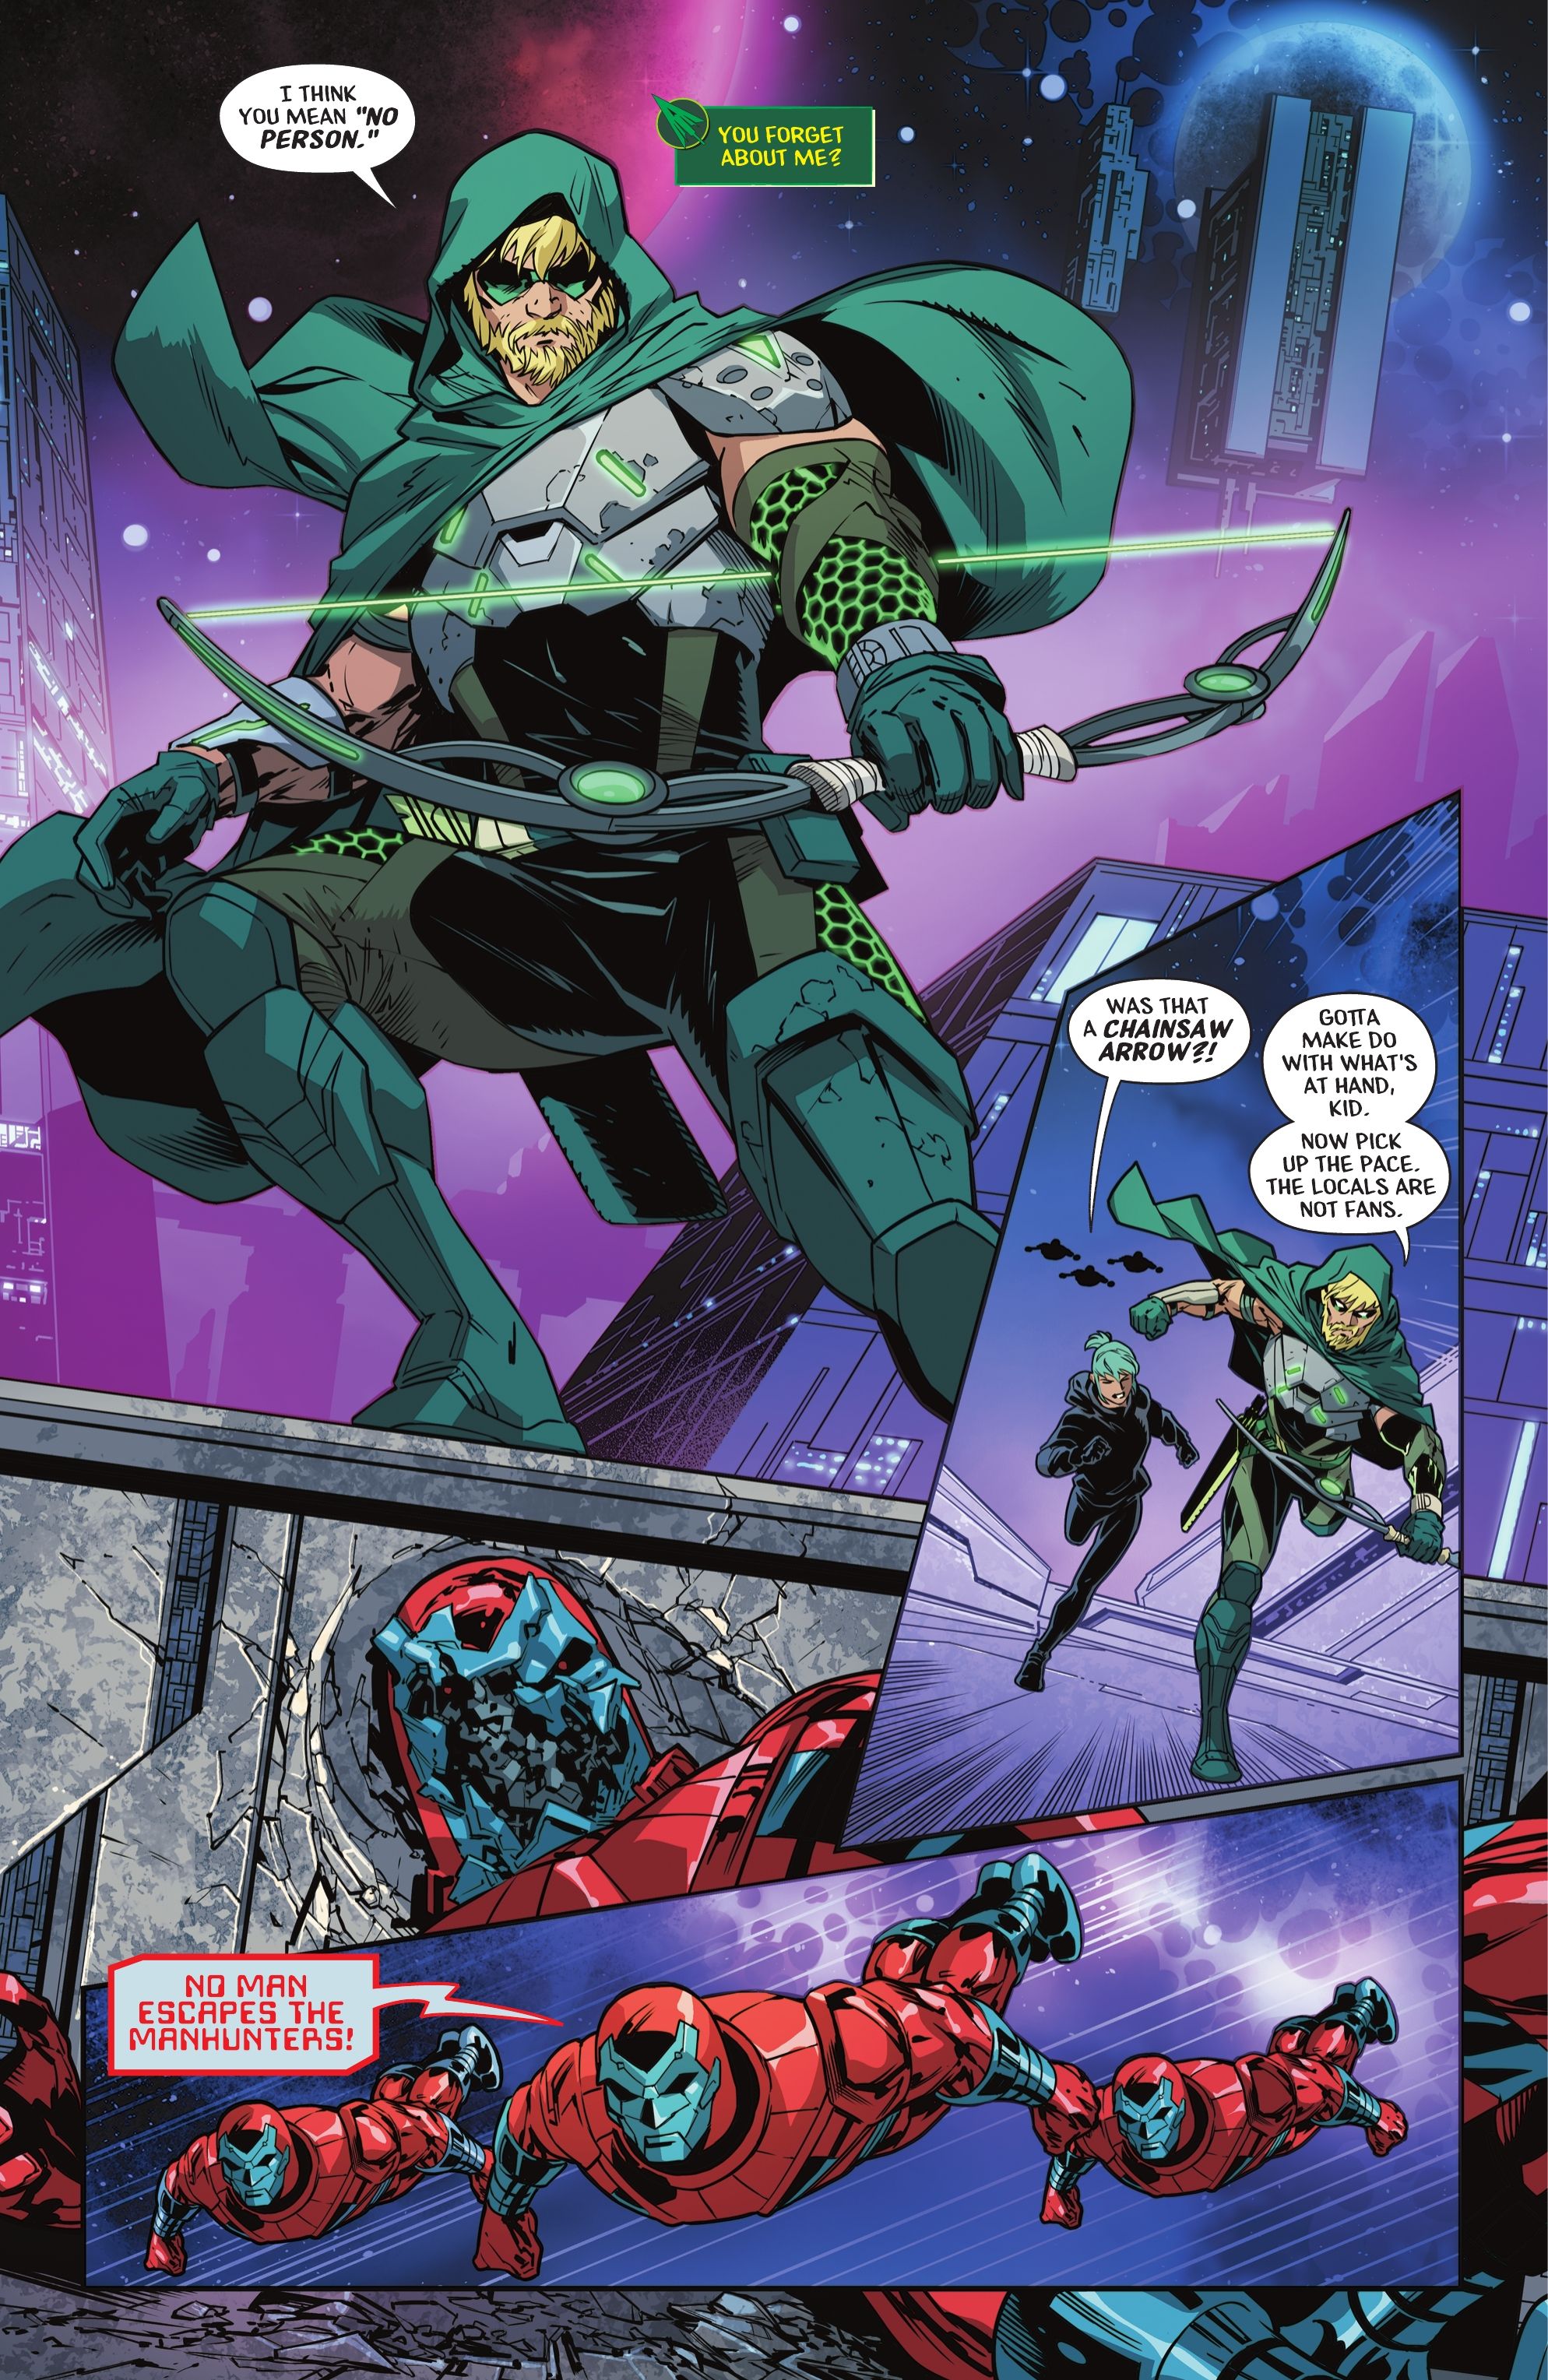 Green Arrow shows off his new outfit and weapon